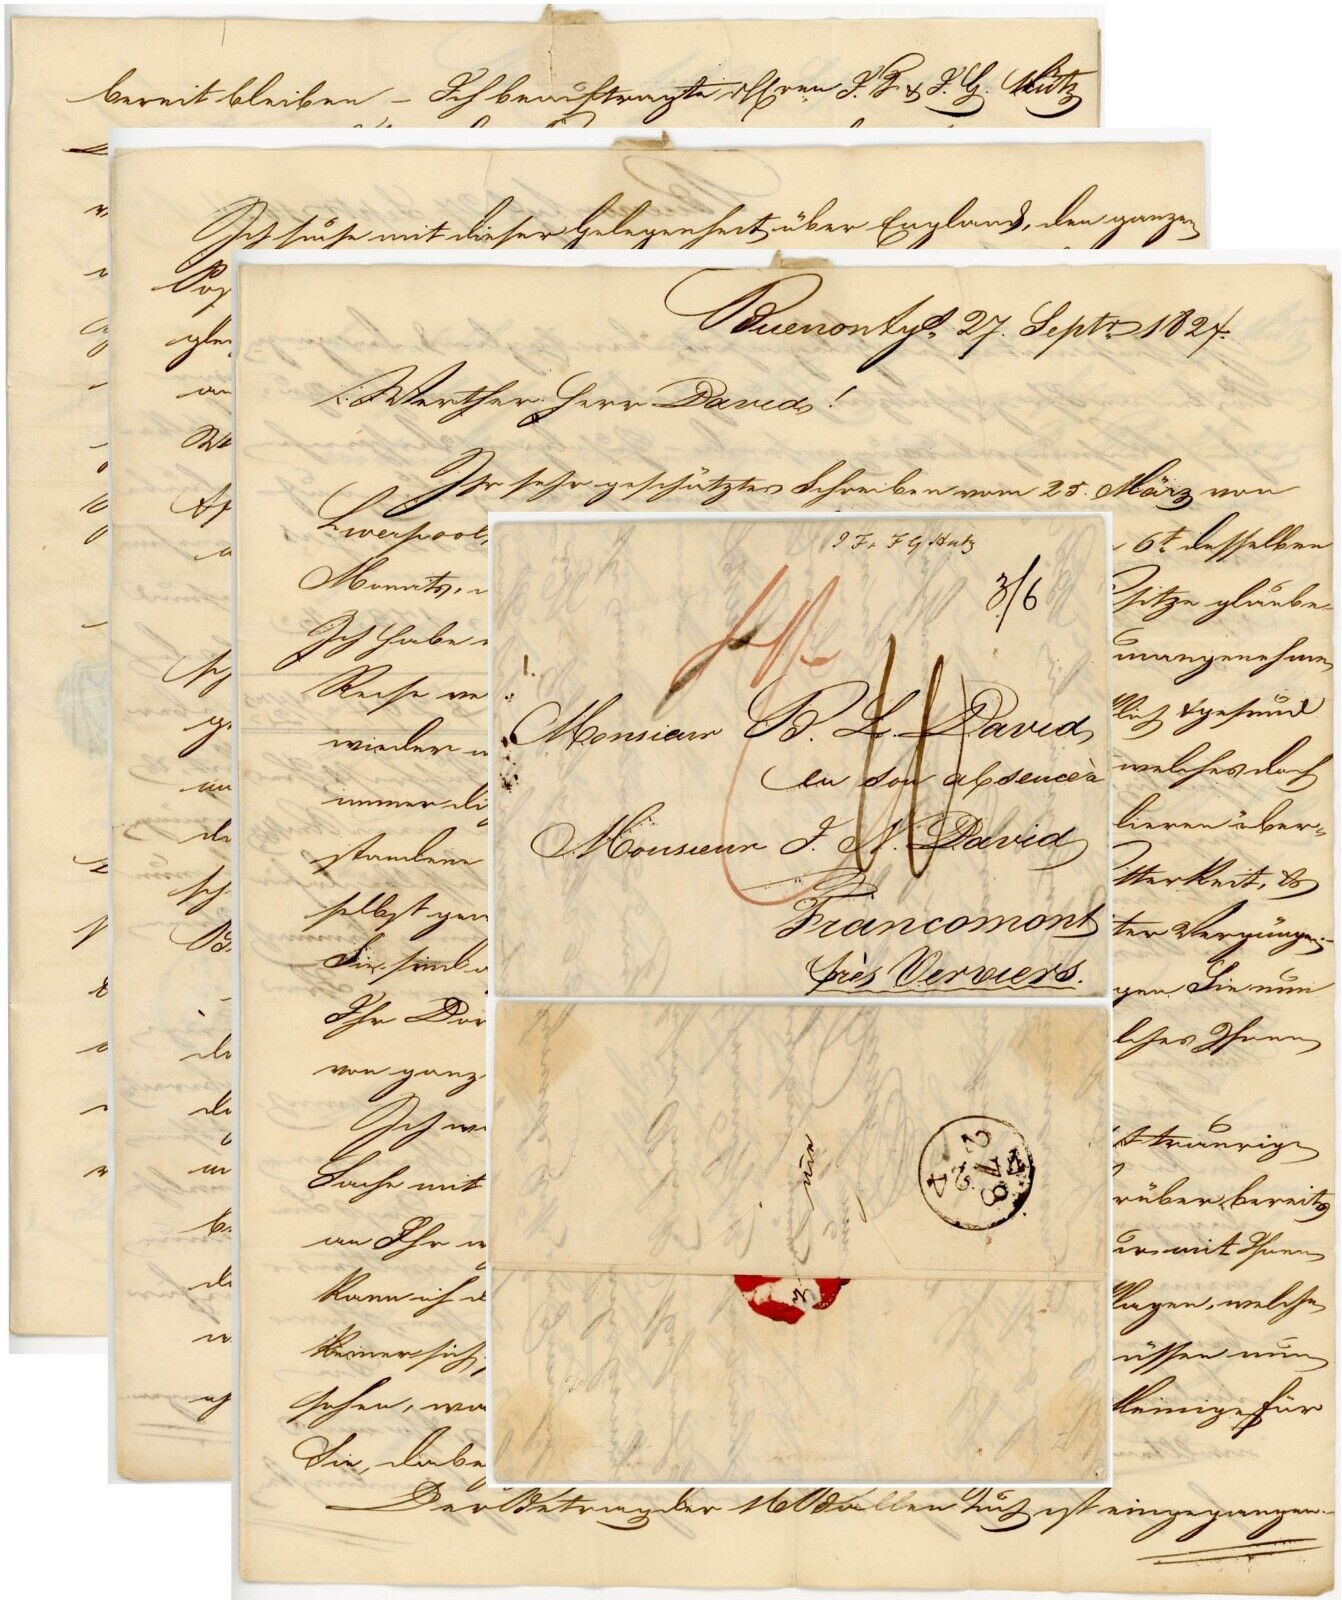 1824 LETTER ARGENTINA to FRANCOMONT FRANCE via UNITED LOW COUNTRIES